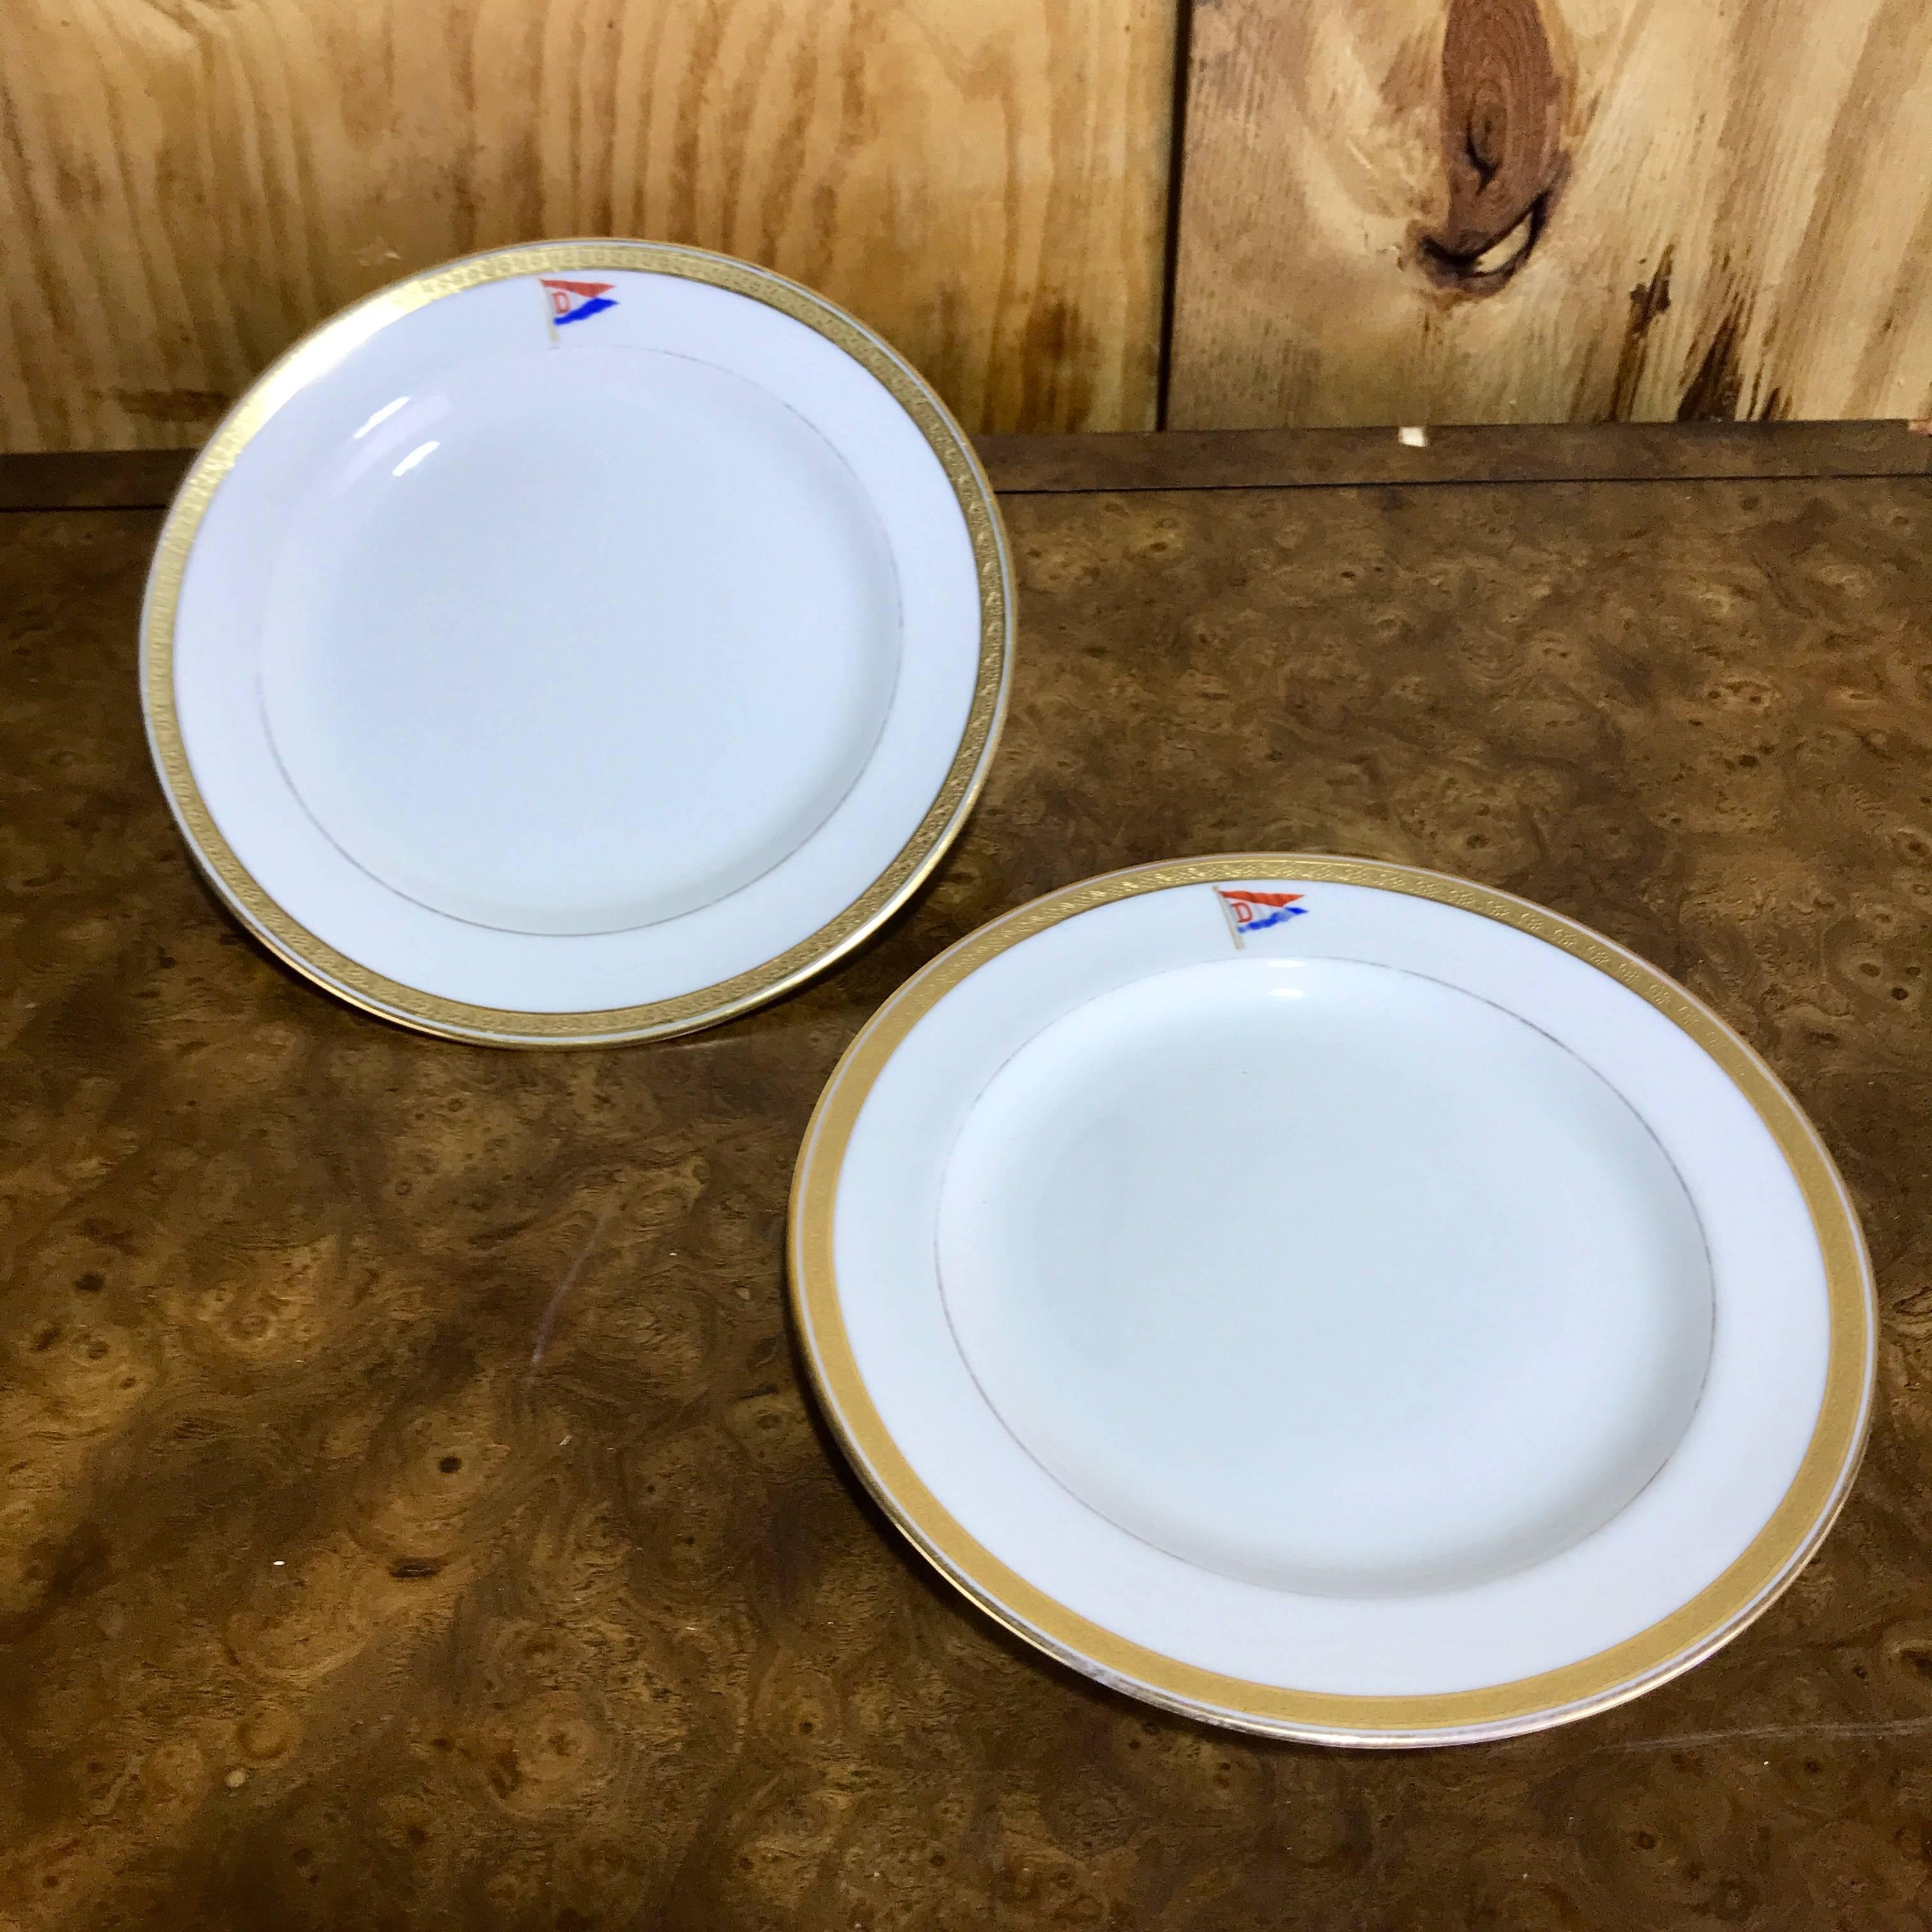 English 12 First Class Steamship or Yacht Dessert Plates by Cauldon For Sale